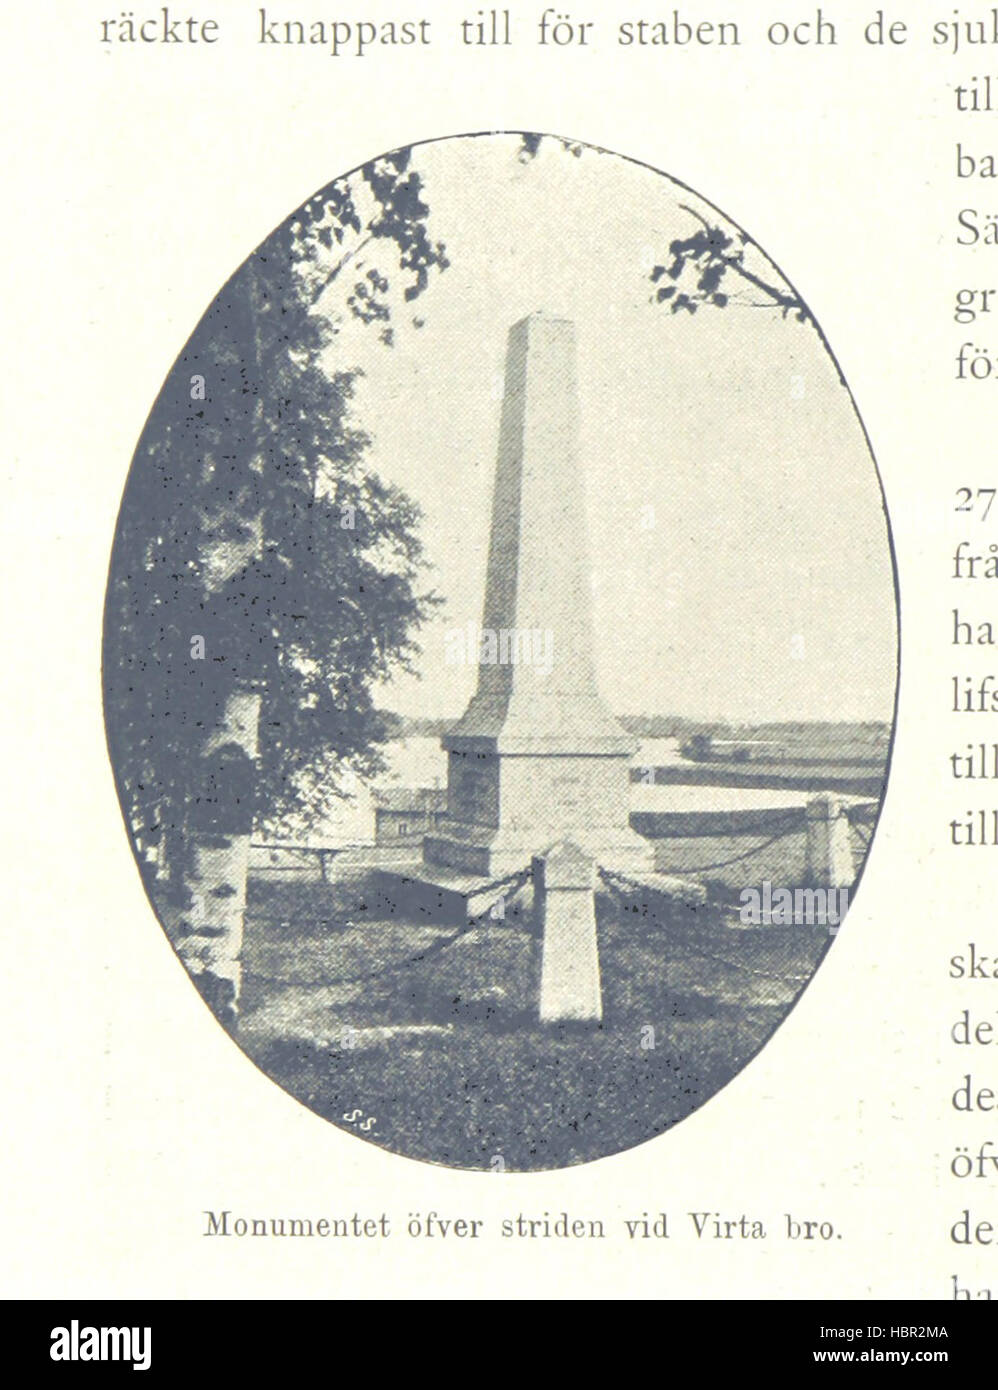 Image taken from page 458 of 'Finska Kriget 1808-1809. [Illustrated.]' Image taken from page 458 of 'Finska Kriget 1808-1809 [Illustrated]' Stock Photo